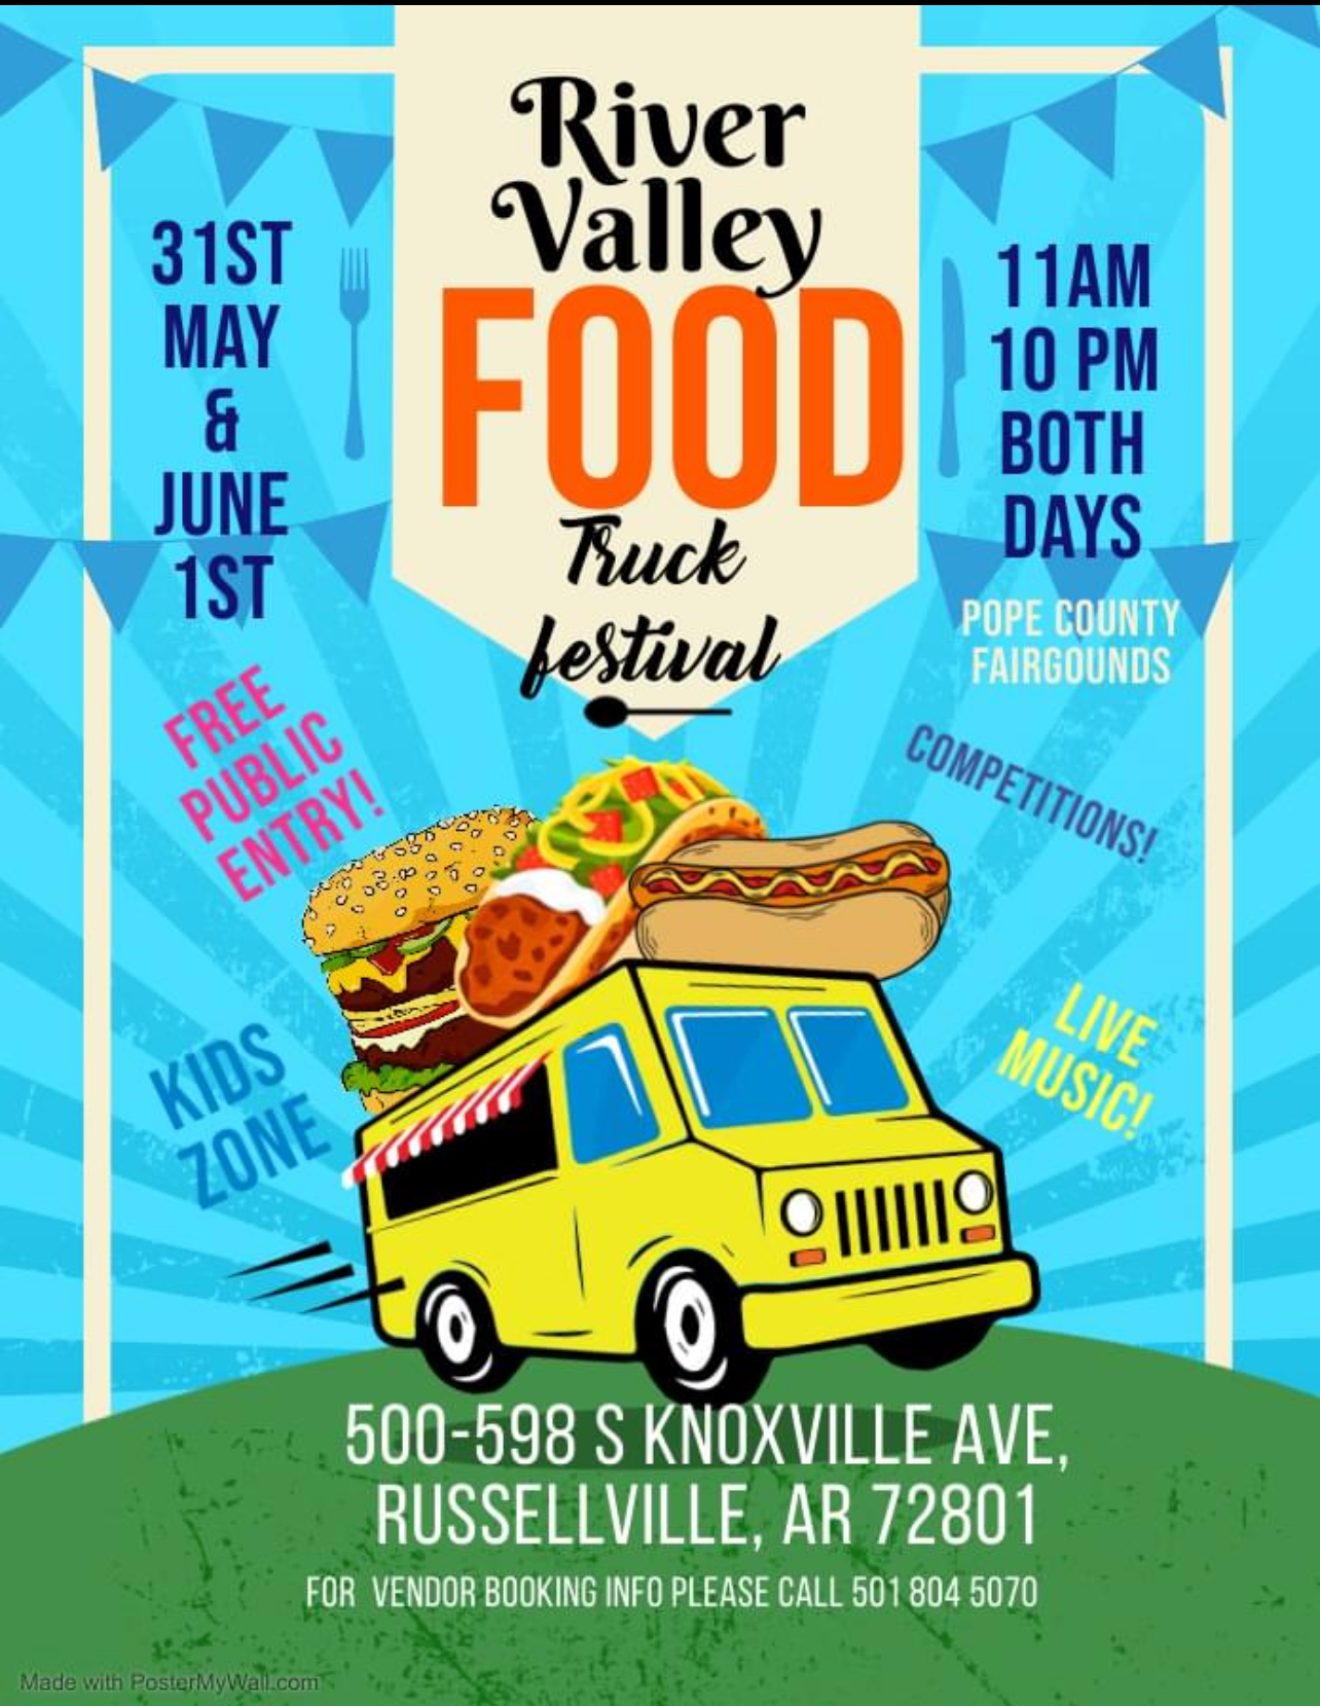 River Valley Food Truck Festival